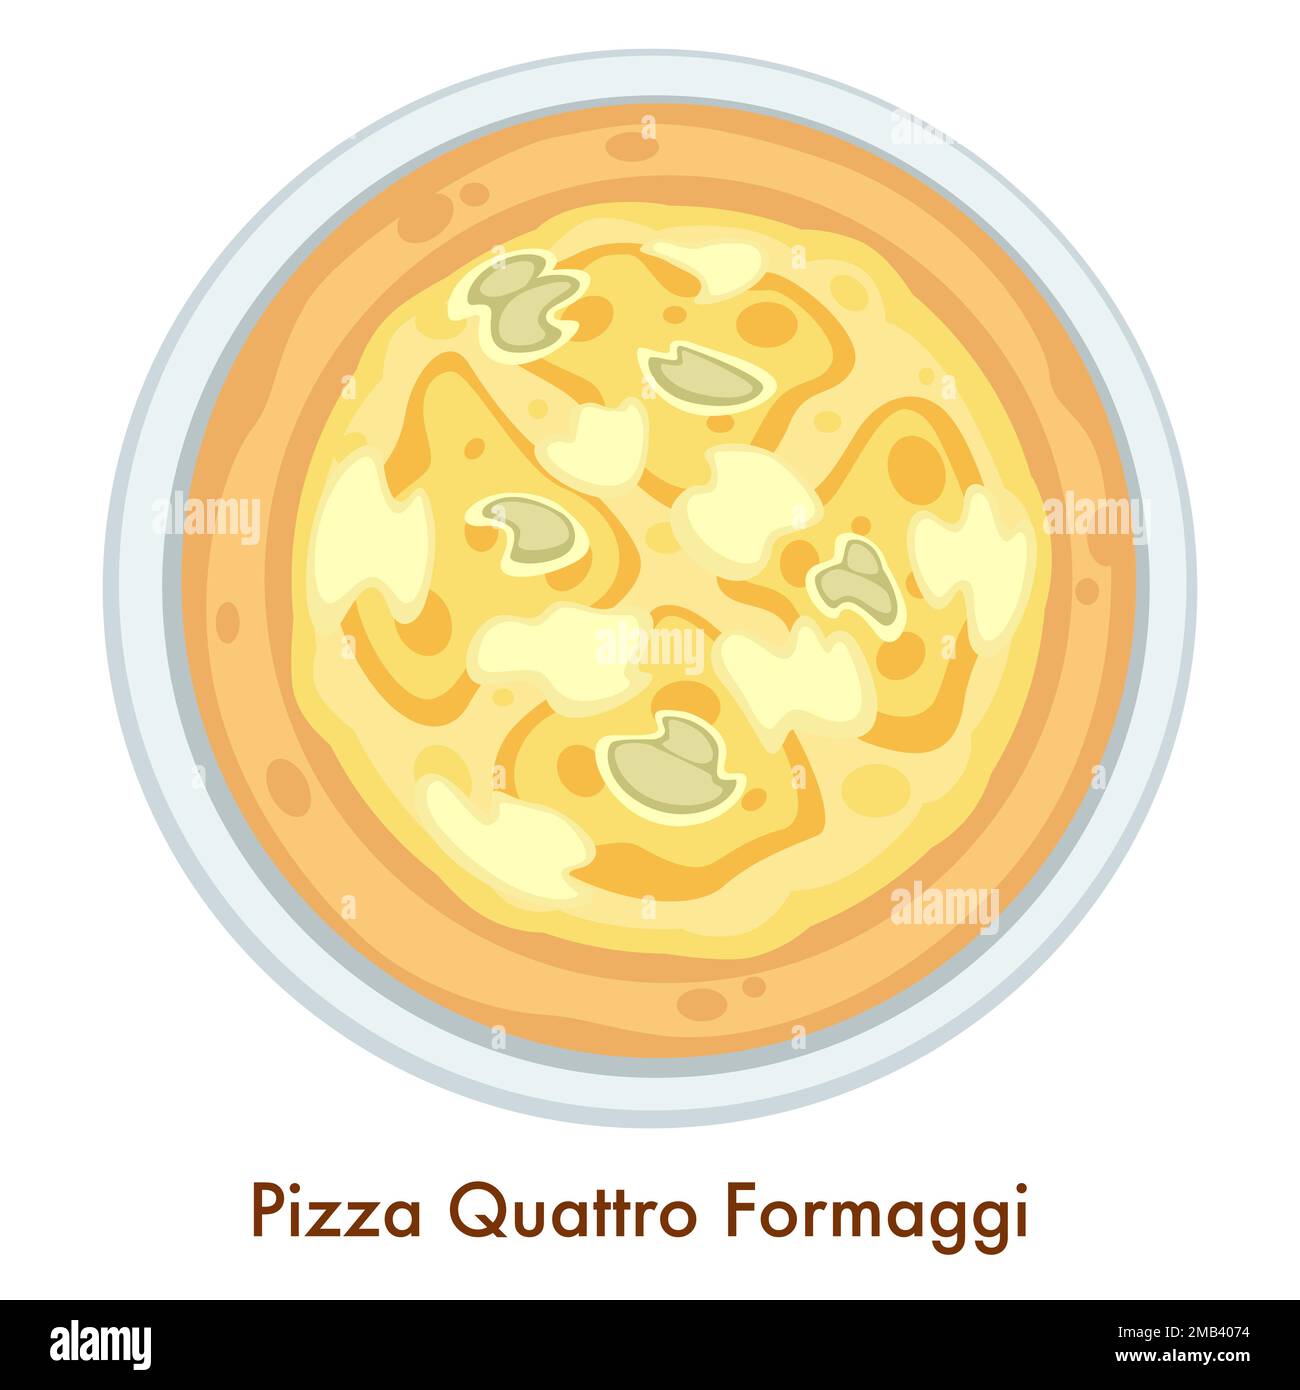 Pizza Quattro Formaggi Italian food dish vector cuisine of Italy isolated vector meal melted cheeses sorts mozzarella and cheddar parmesan and blue ch Stock Vector